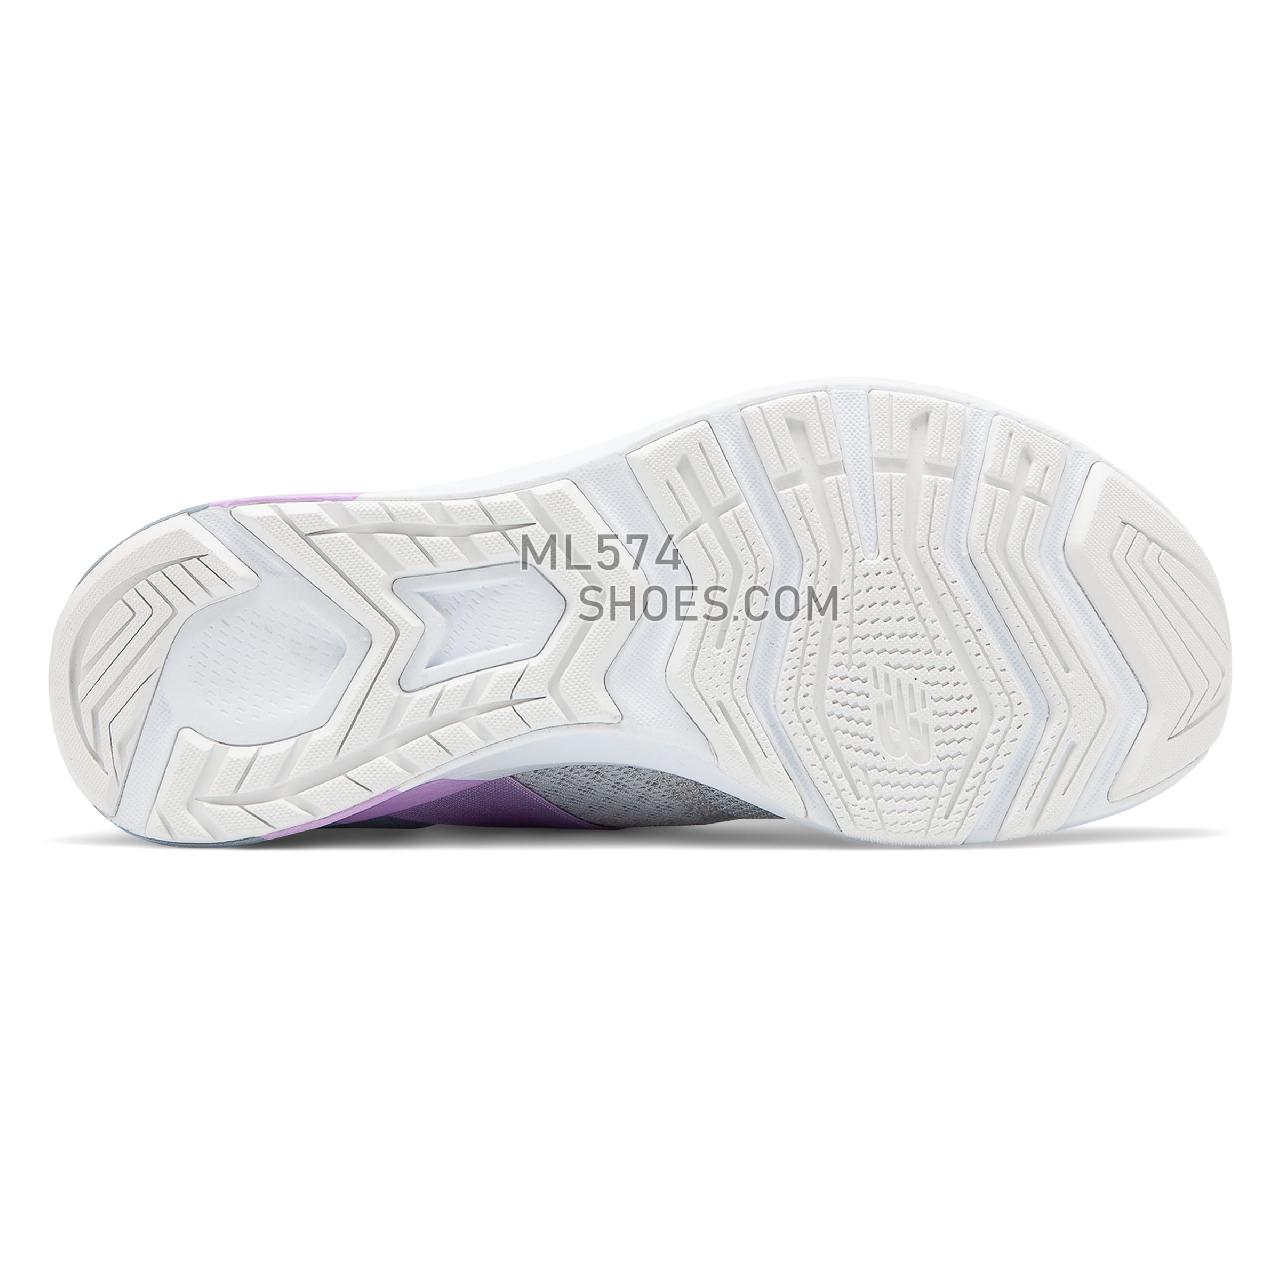 New Balance FuelCore NERGIZE - Women's Whats Trending - Light Aluminium with Reflection and Dark Violet Glo - WXNRGNG